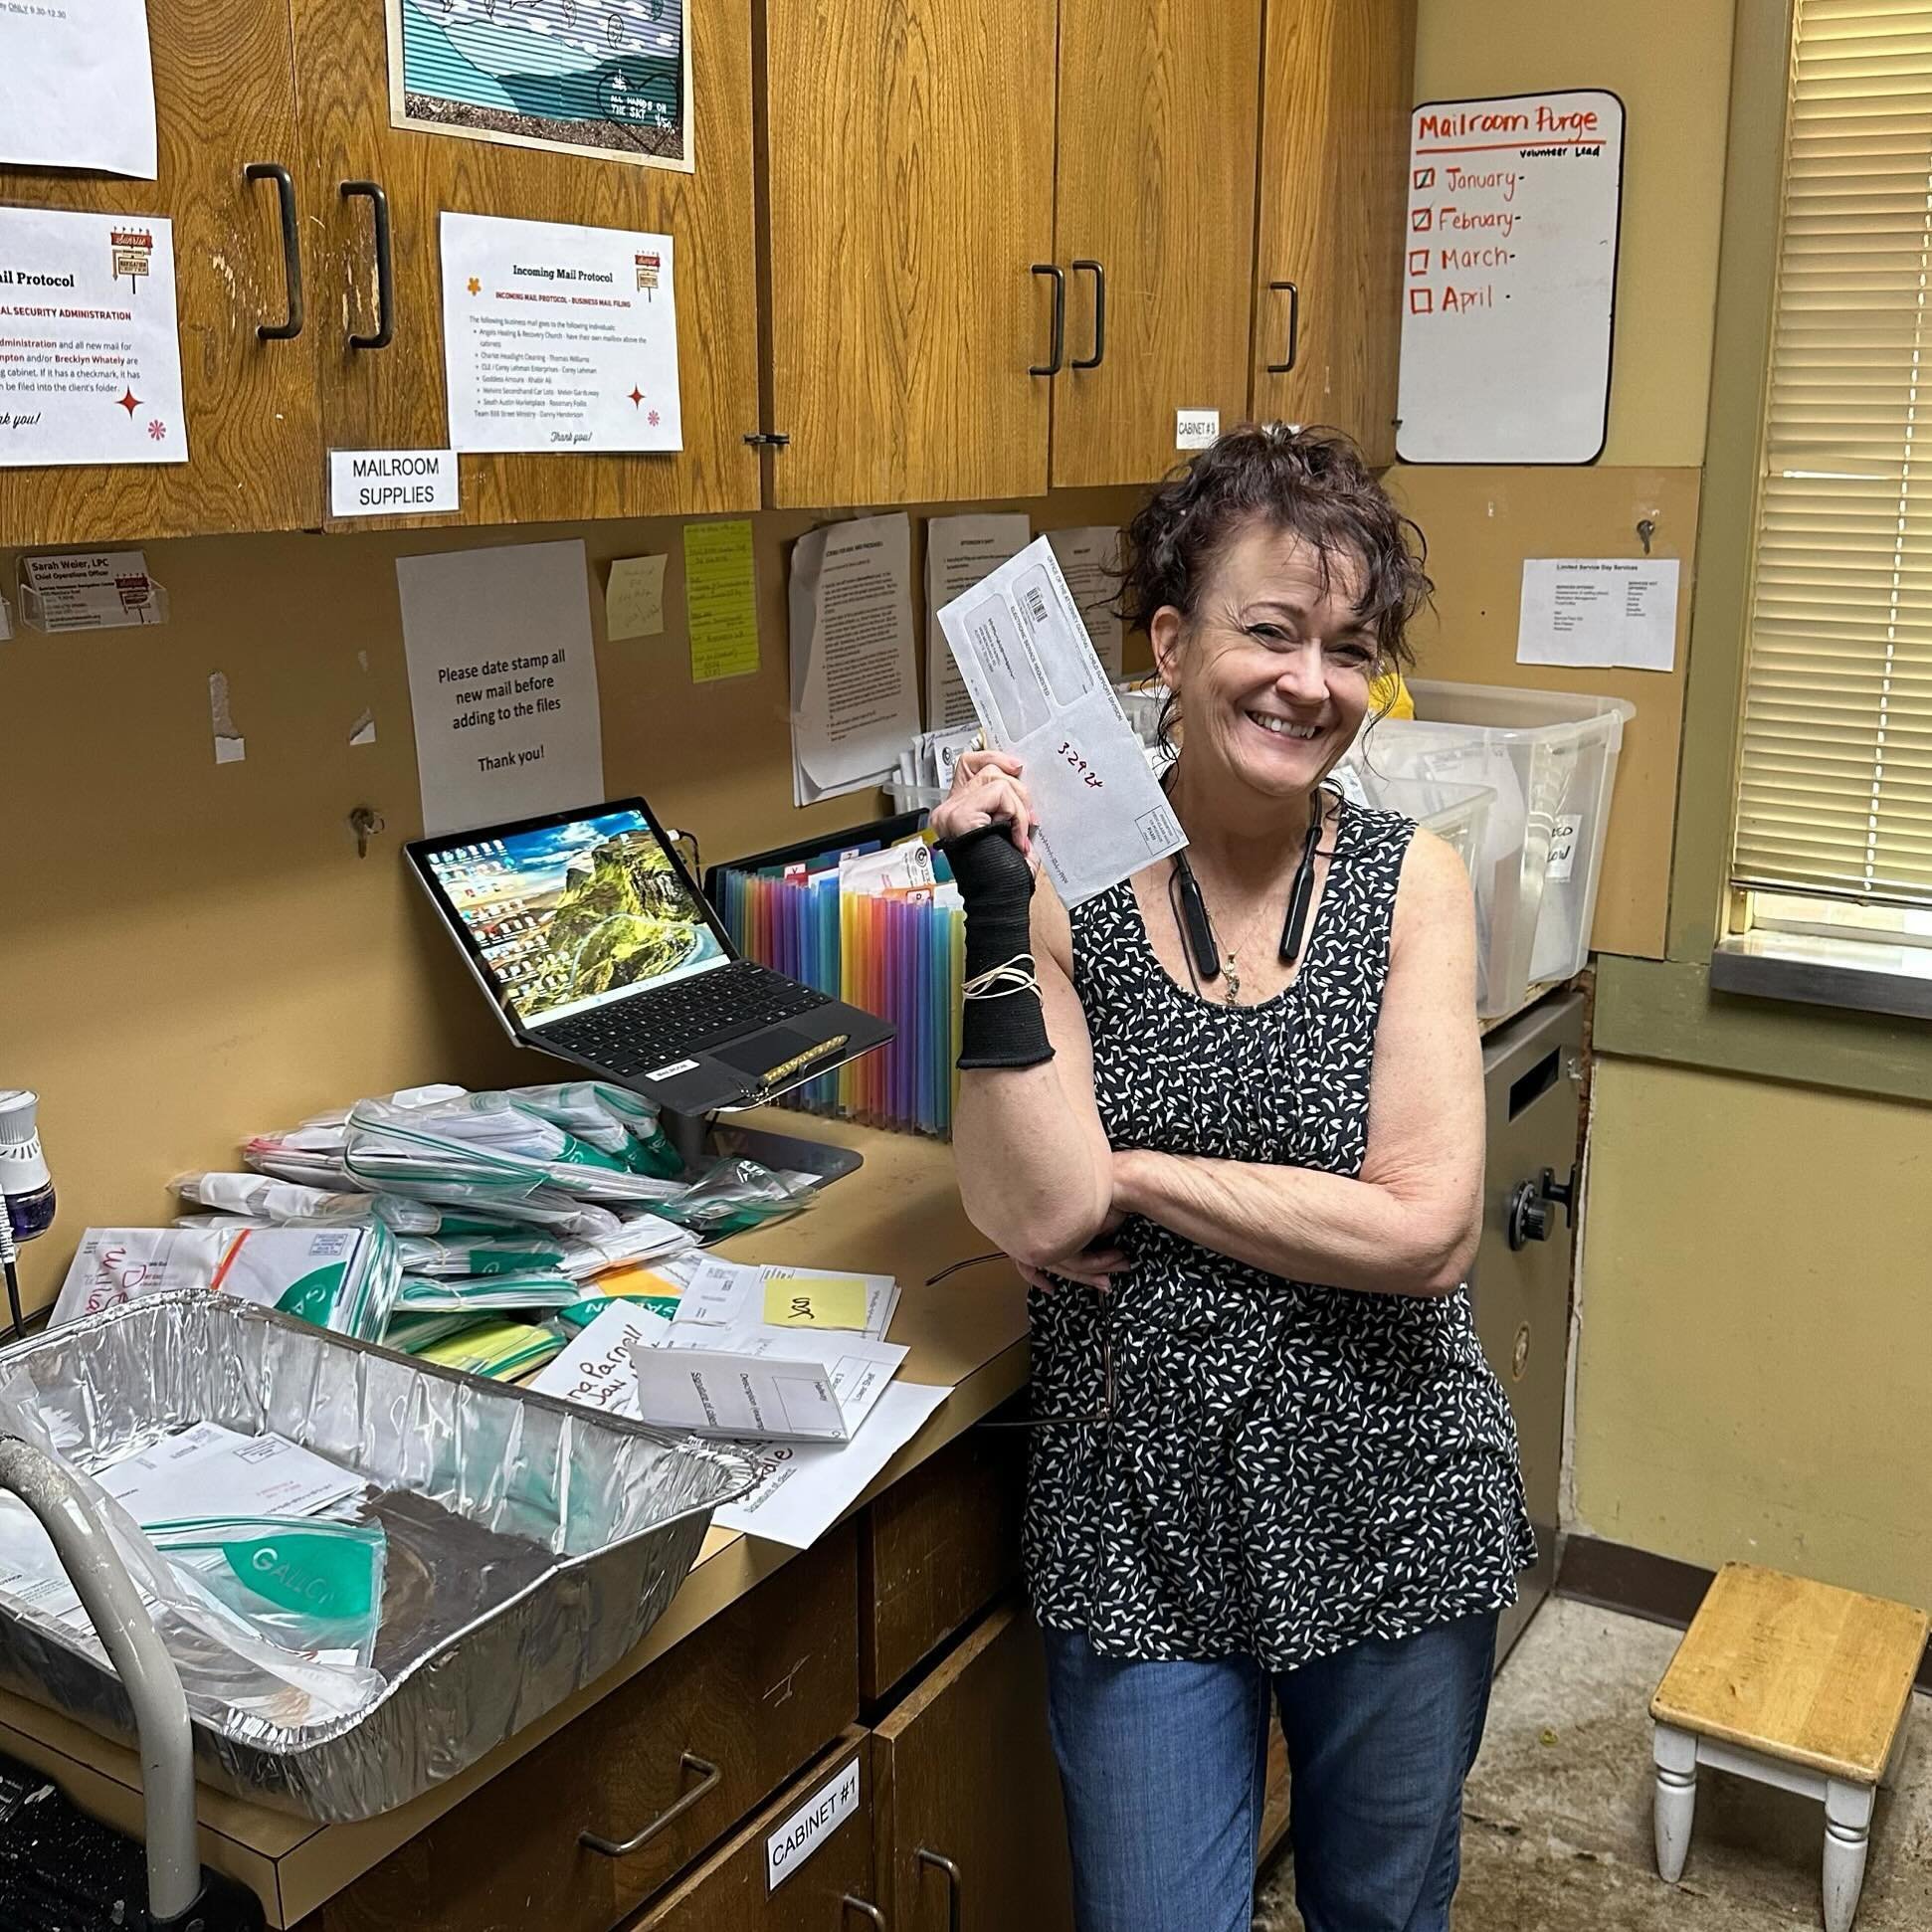 Every day, Sunrise gets mail for more people than 80% of the cities in Texas. 📫

Processing that essential lifeline of mail and charging client devices at our Hub location takes an army of volunteers and Debbie is one of the most dedicated ones we h